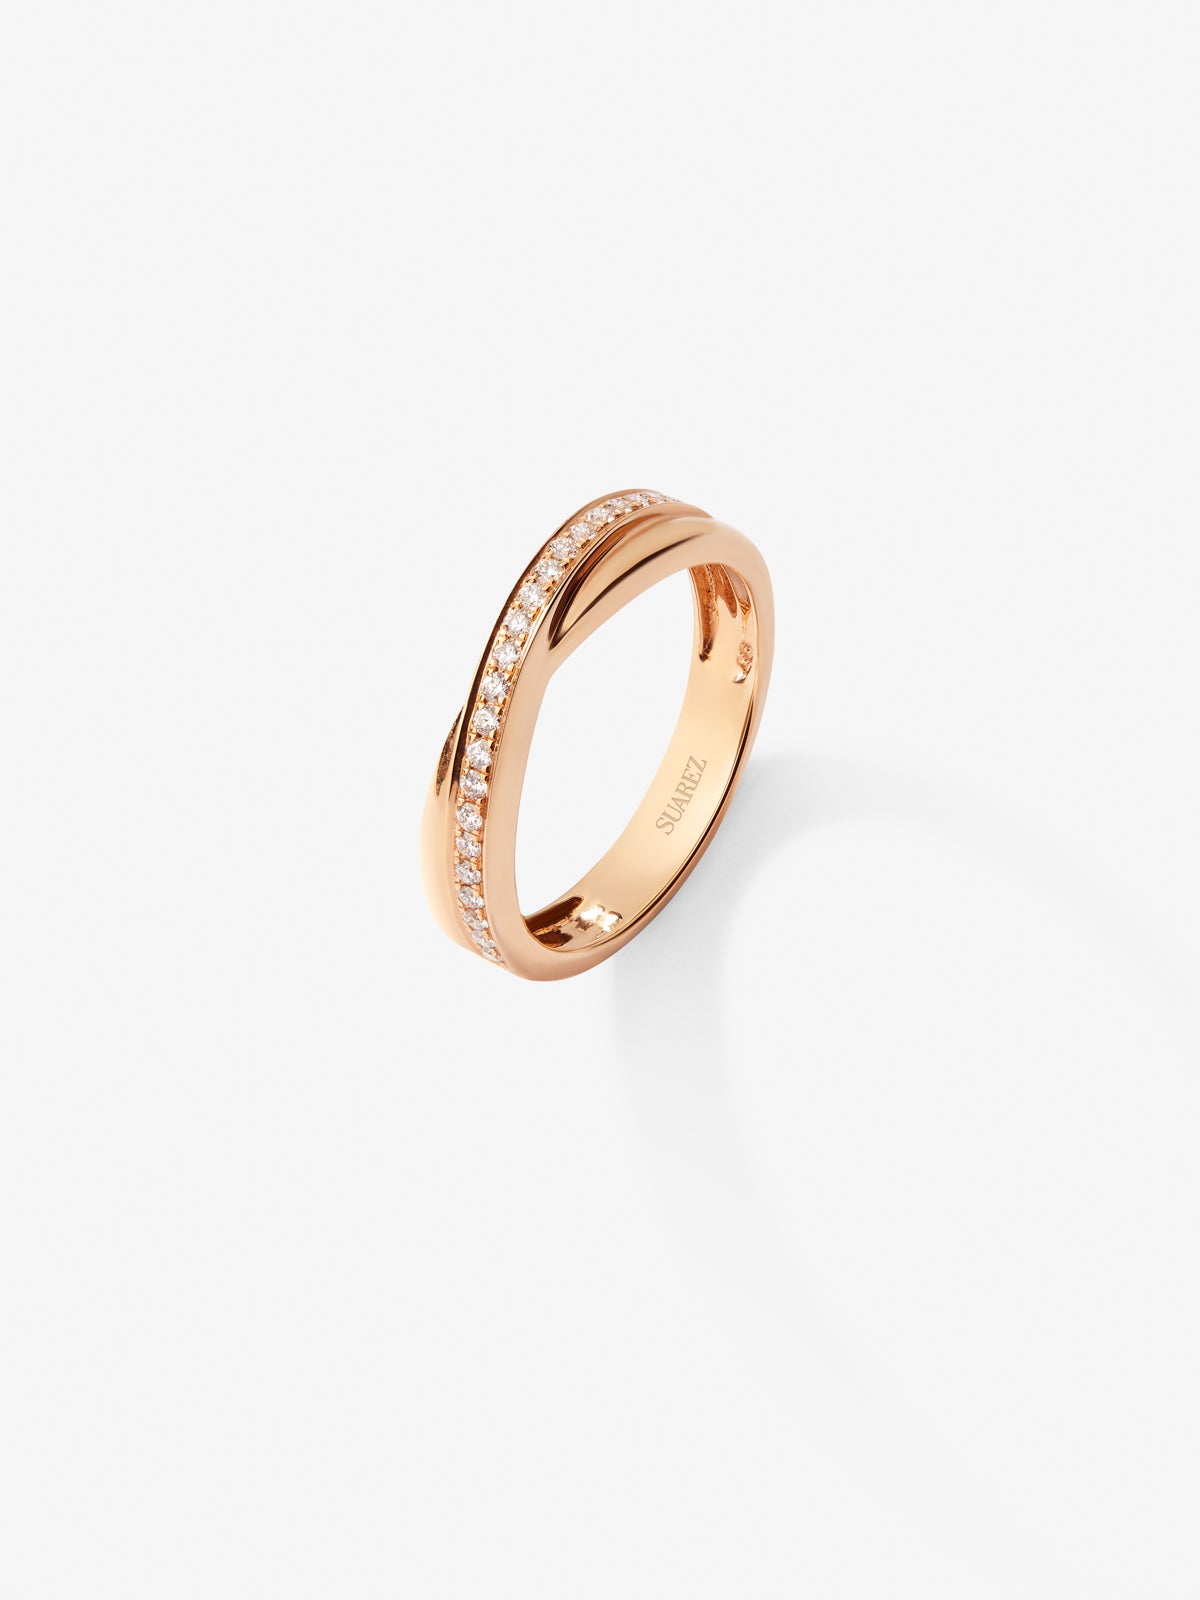 18K rose gold cross ring with 23 brilliant-cut diamonds with a total of 0.18 cts